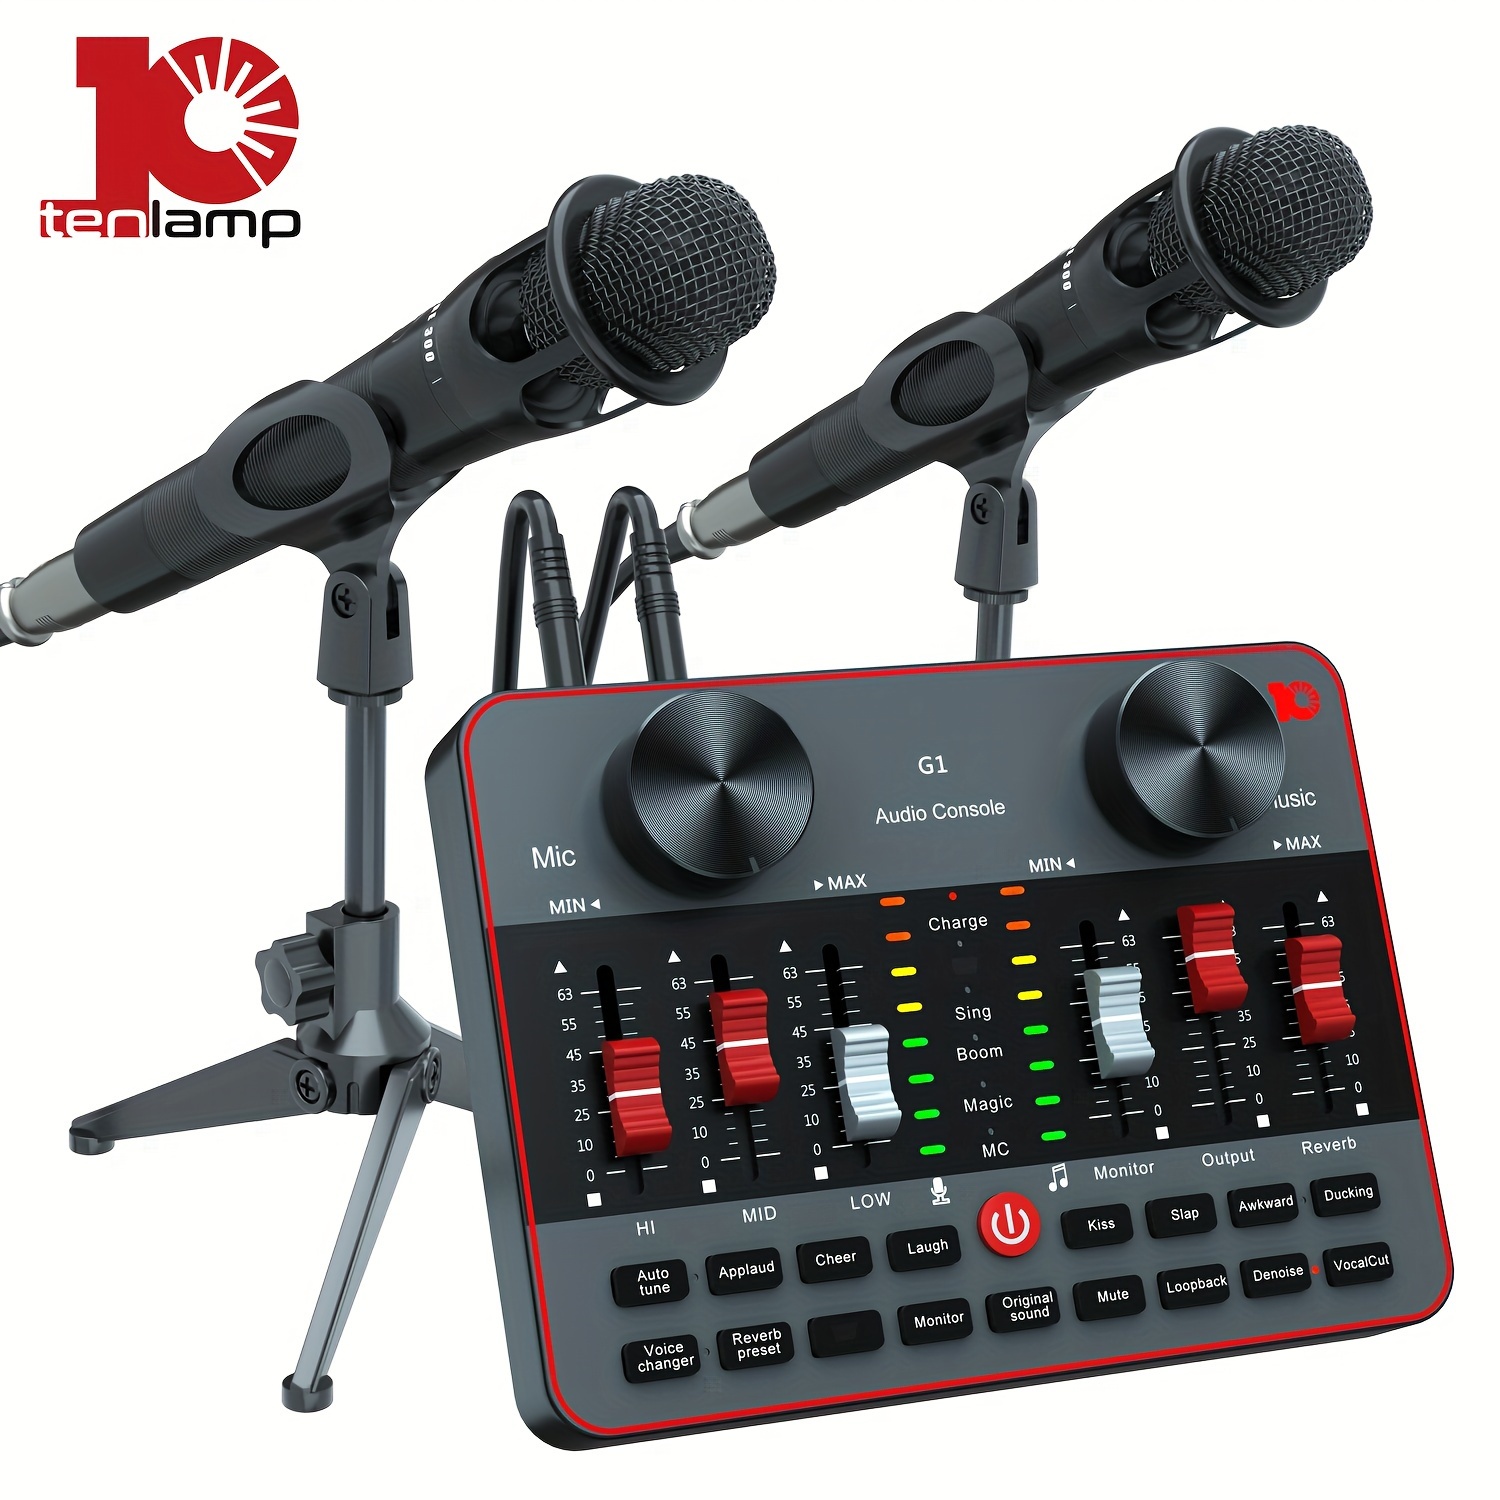 

Podcast Equipment Bundle, All-in-one Audio Interface Dj Mixer With 2 Condenser Microphones, Recording Studio Kit Live Sound Card For Singing Broadcast, Live Streaming, Gaming